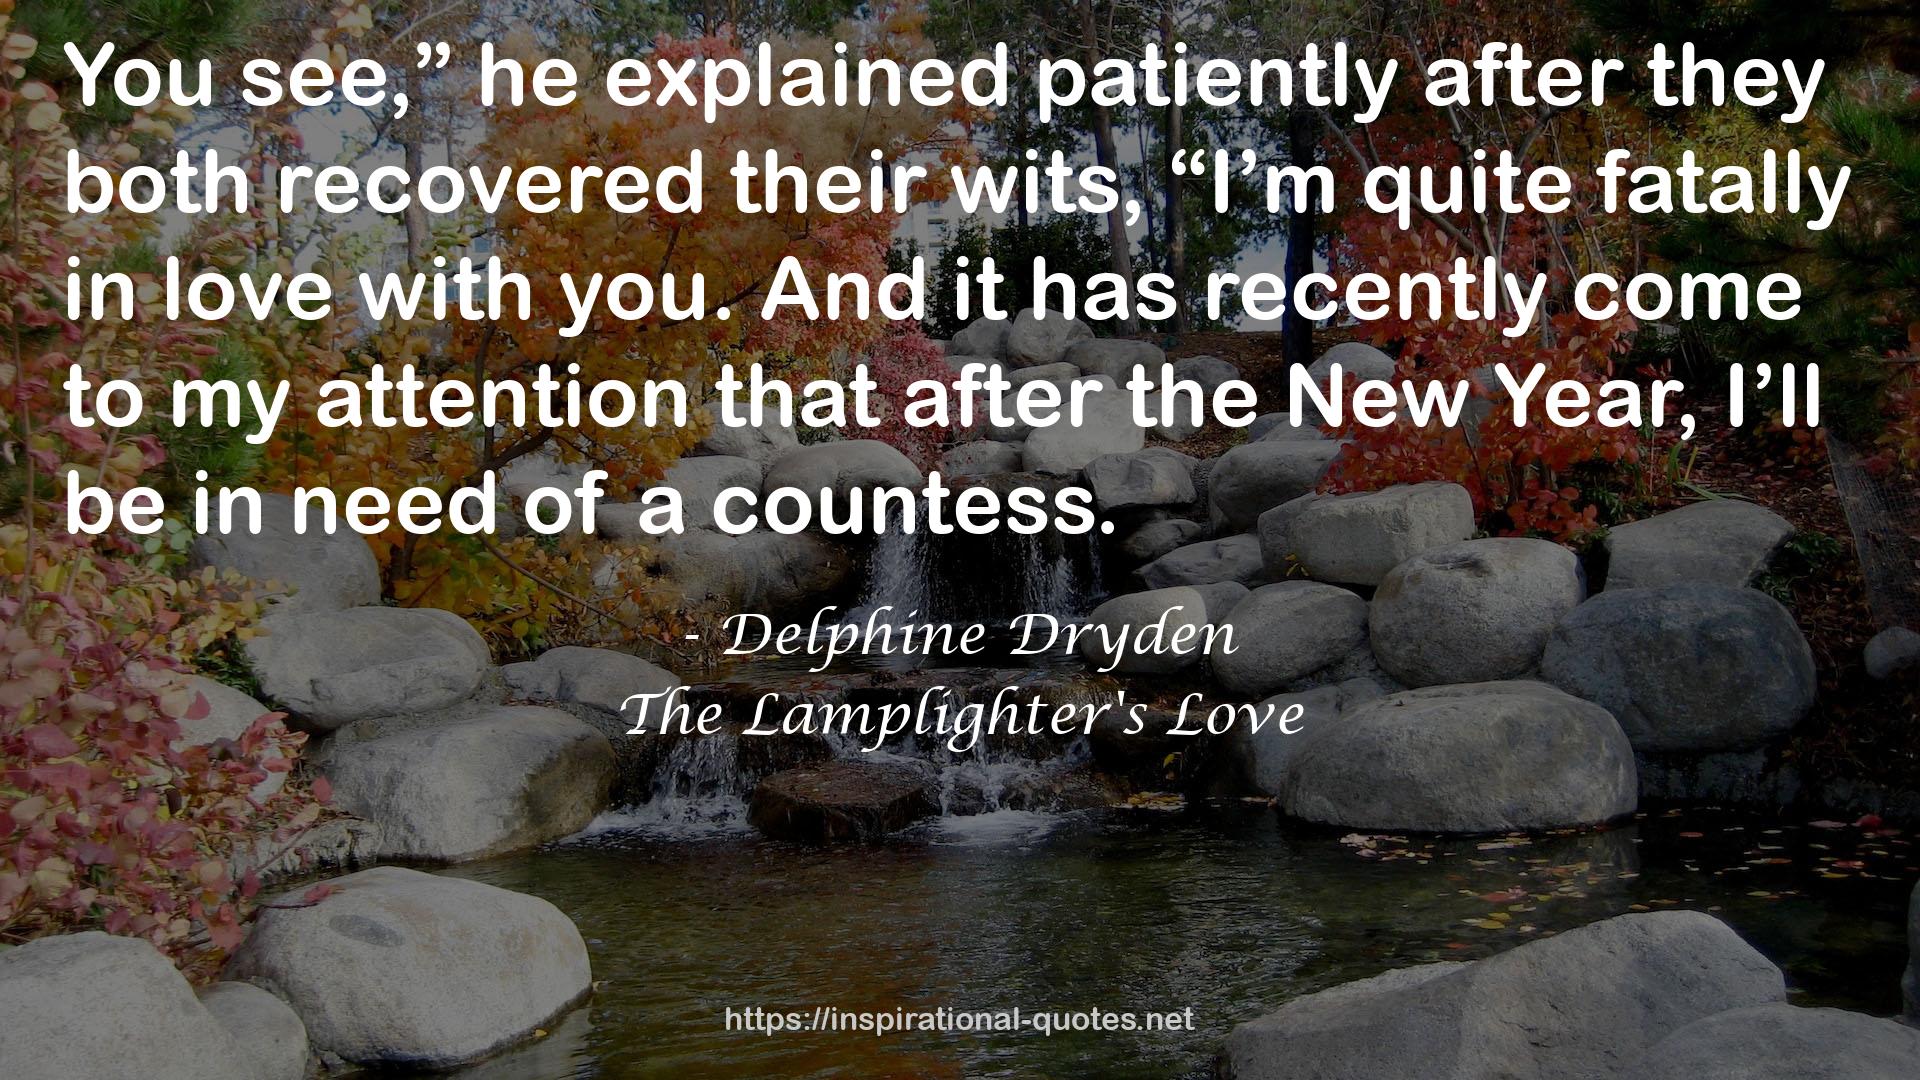 The Lamplighter's Love QUOTES